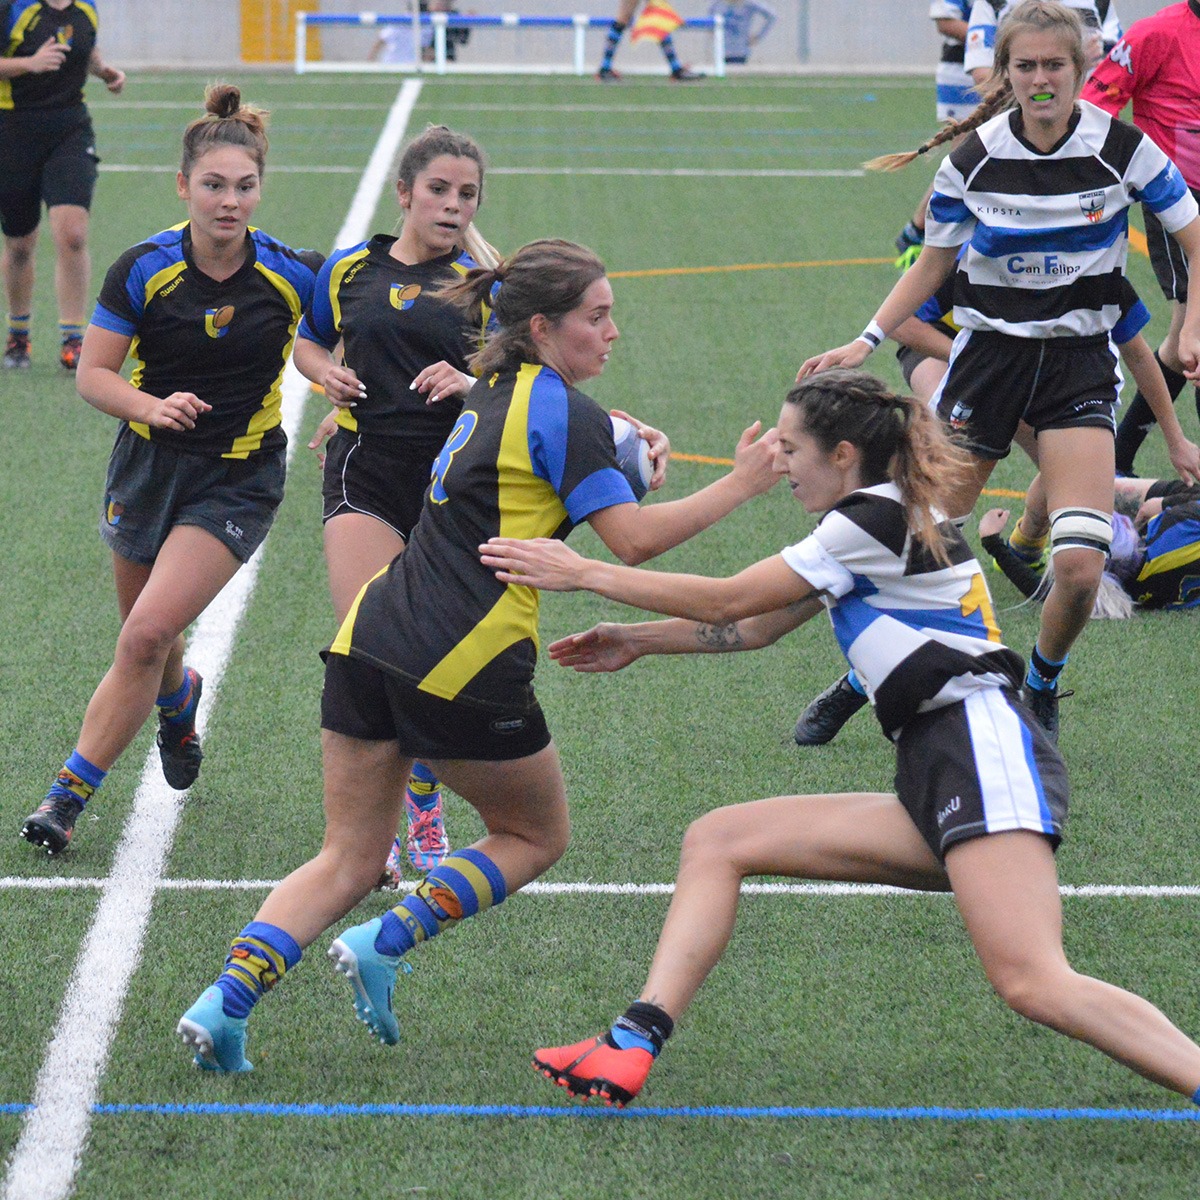 CRUC rugby castelldefels